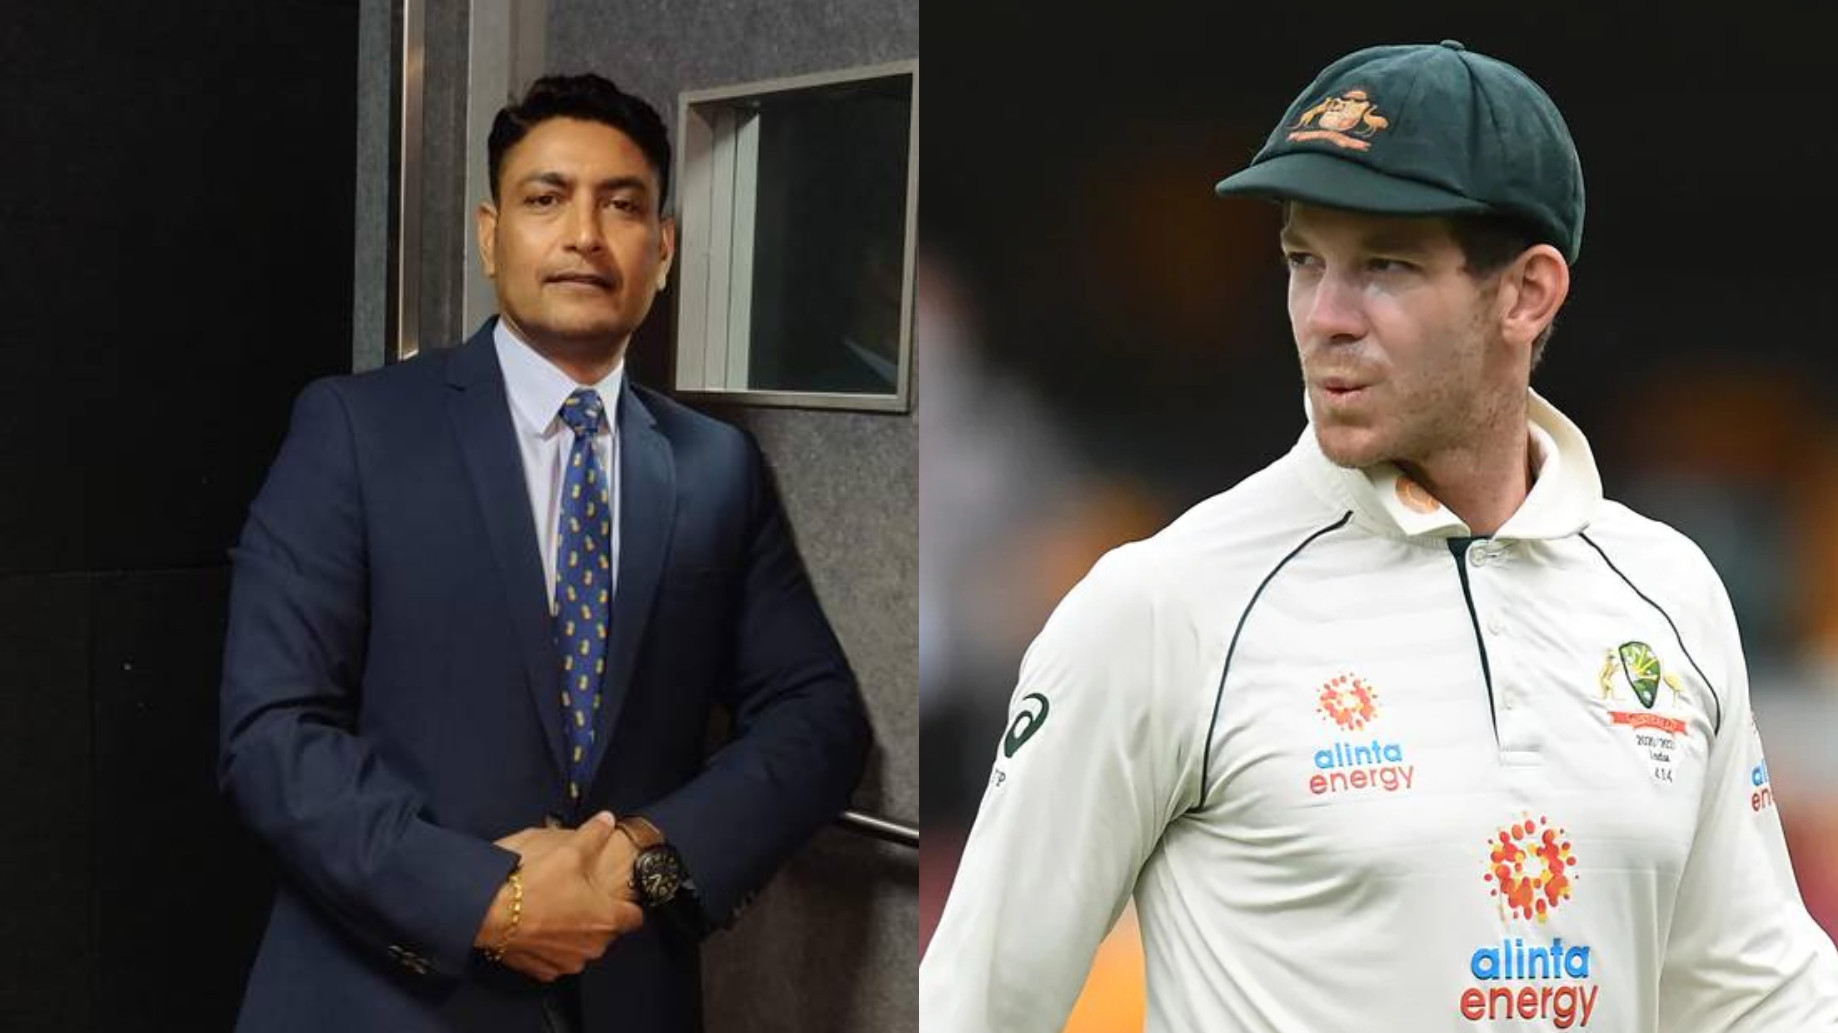 “It's their fault for taking eyes off the ball and losing in Gabba after 32 years” Dasgupta reacts to Paine’s comments